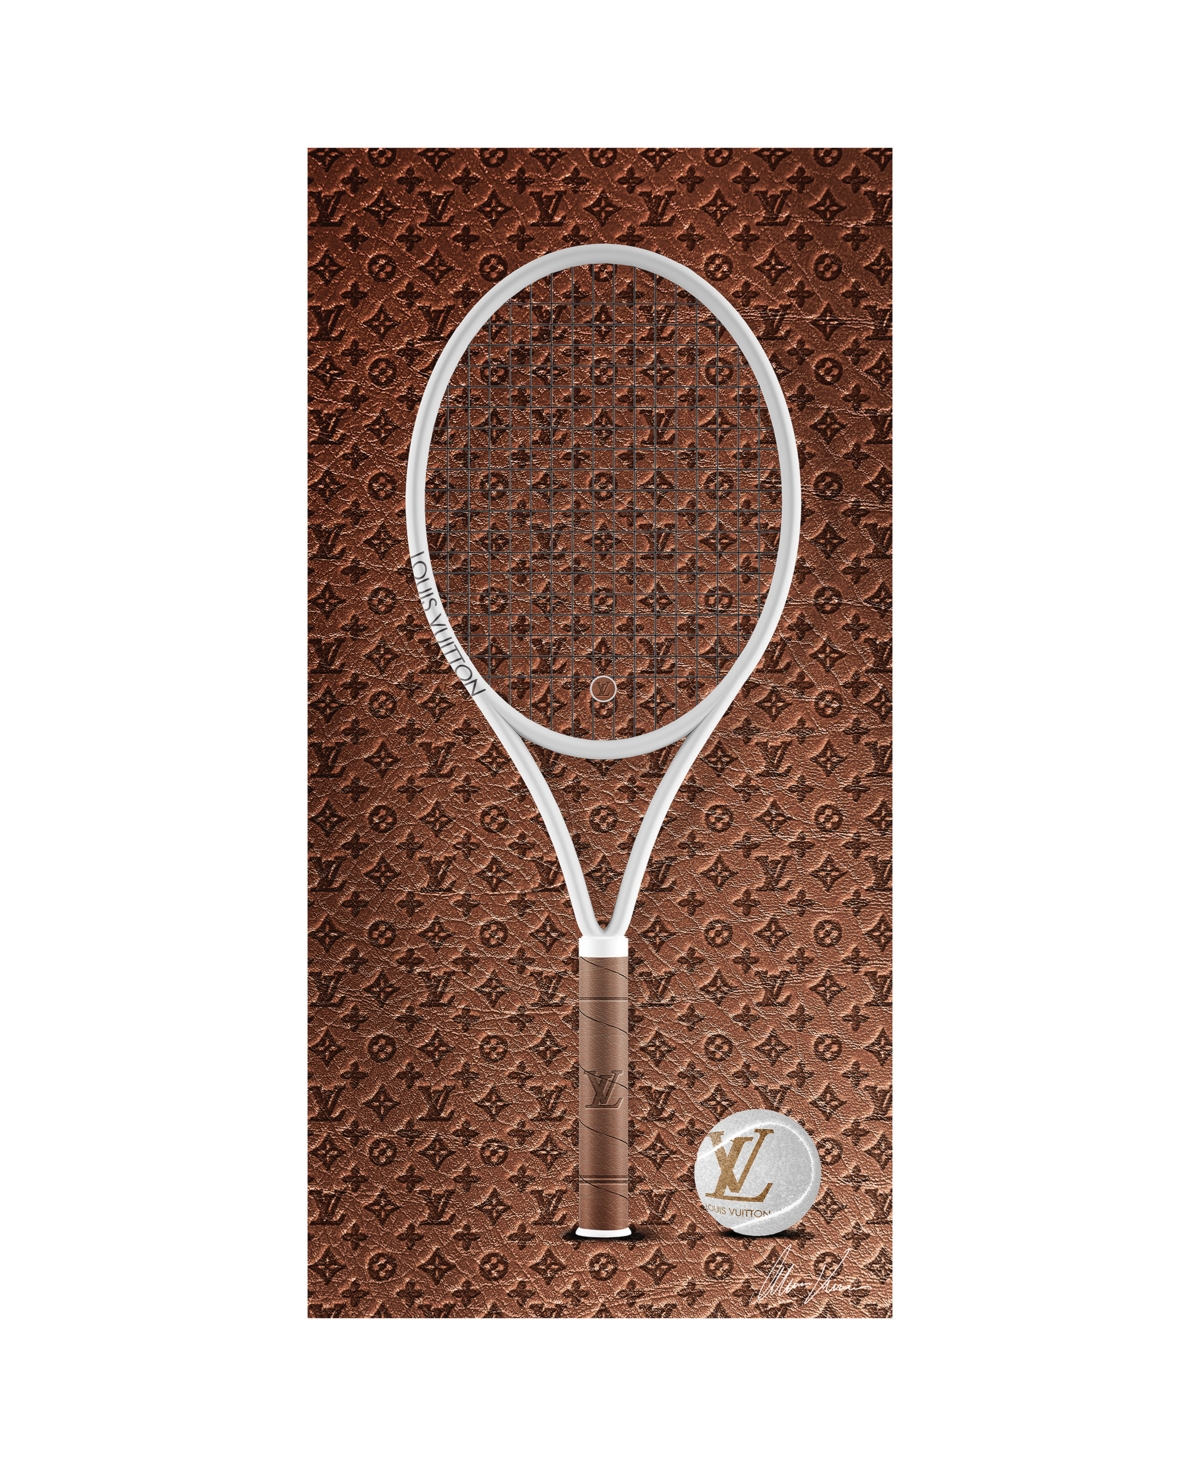 Empire Art Direct Louis Vuitton Vibes Racquet Frameless Free Floating Tempered Glass Panel Graphic Wall Art In Brown